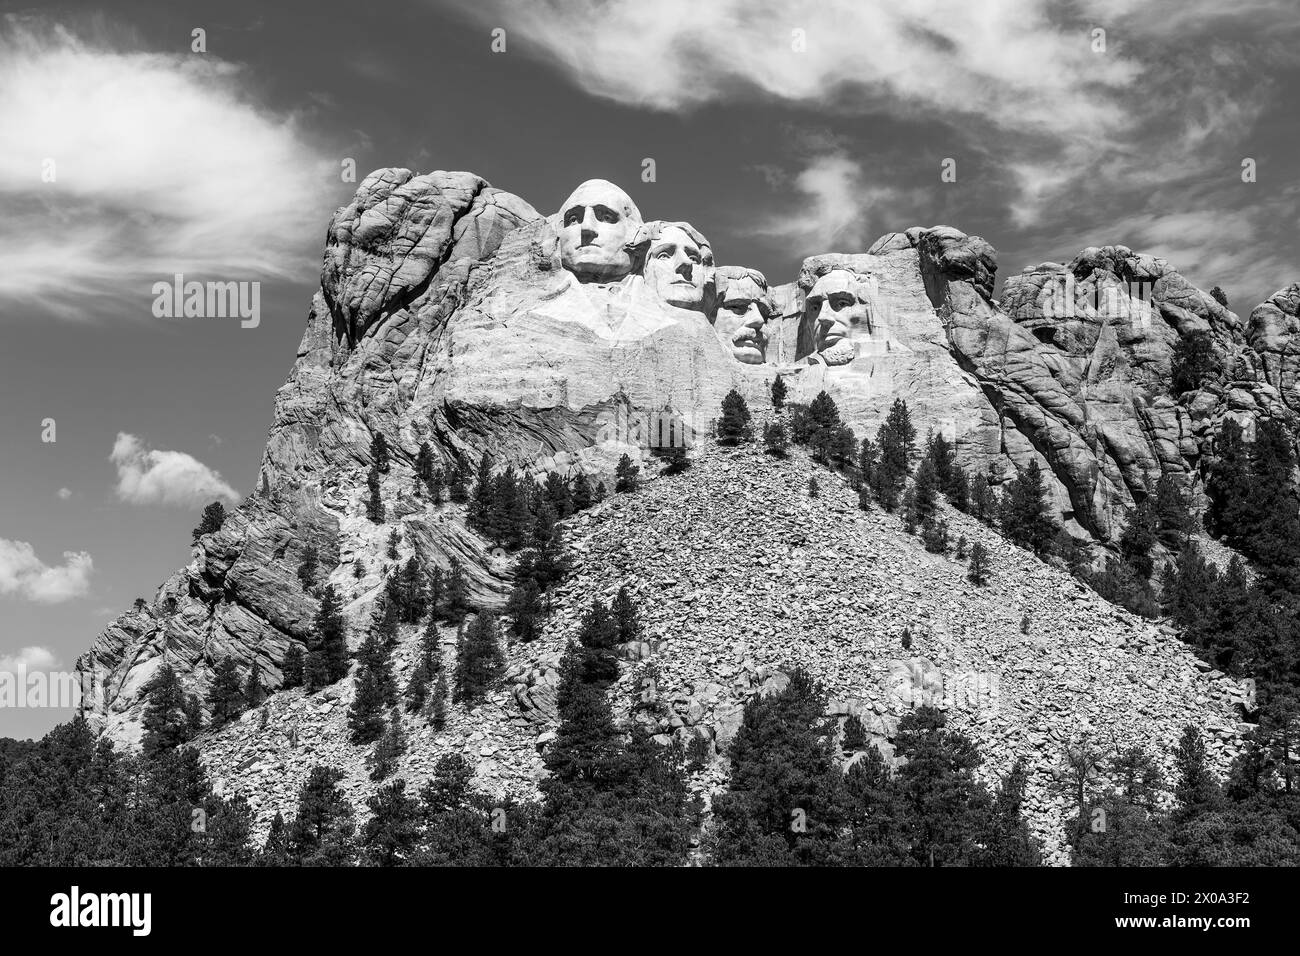 Mount Rushmore national monument in black and white, Rapid City, South Dakota, United States of America, USA. Stock Photo